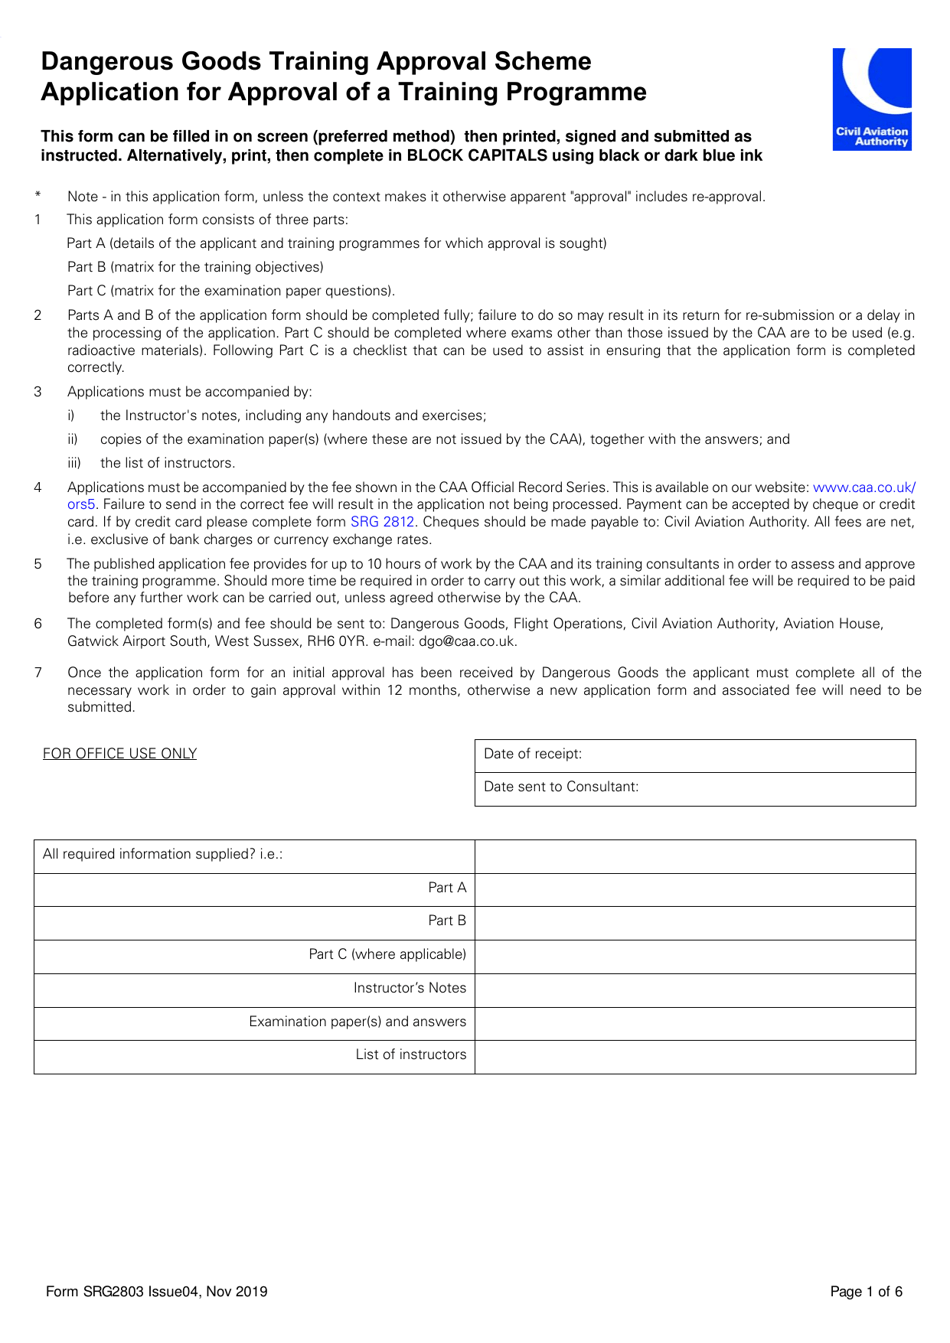 Form SRG2803 Dangerous Goods Training Approval Scheme Application for Approval of a Training Programme - United Kingdom, Page 1